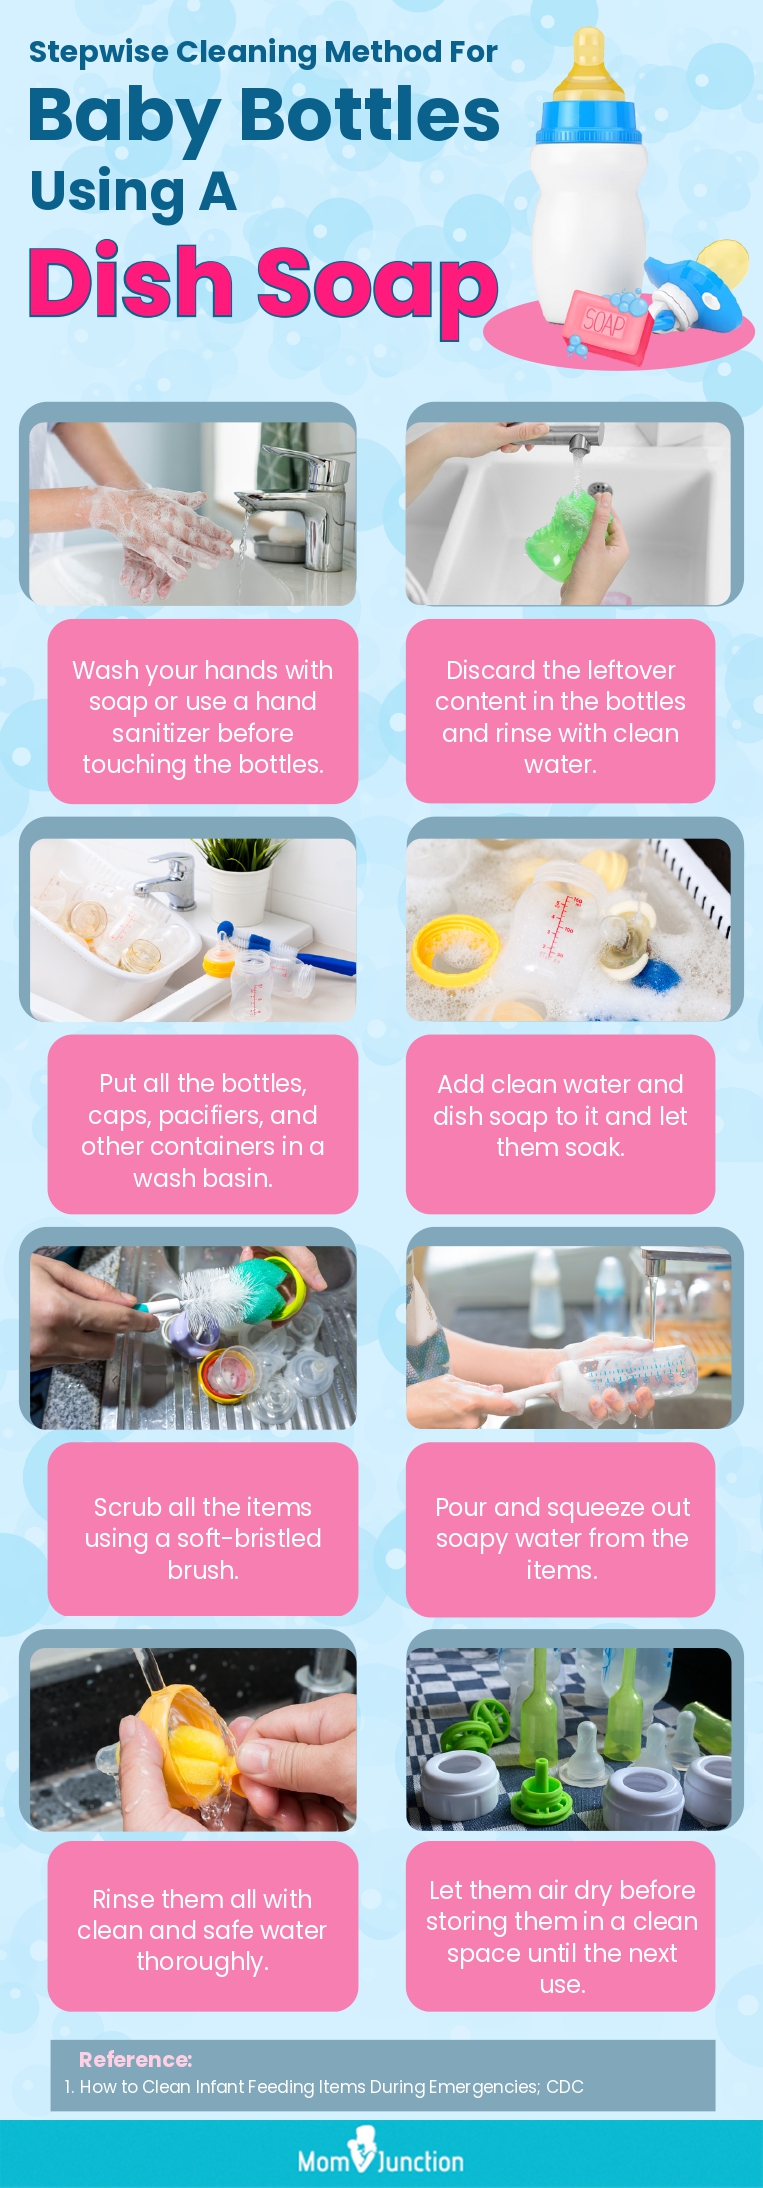 Keeping Baby Bottles Clean with Finish Dish Detergent • Domestic